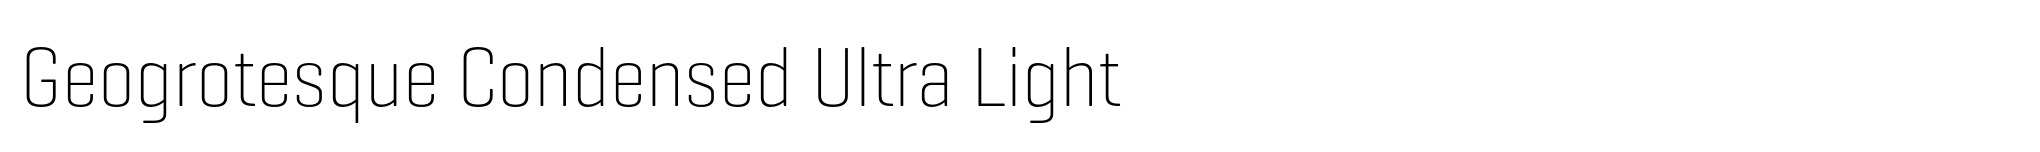 Geogrotesque Condensed Ultra Light image